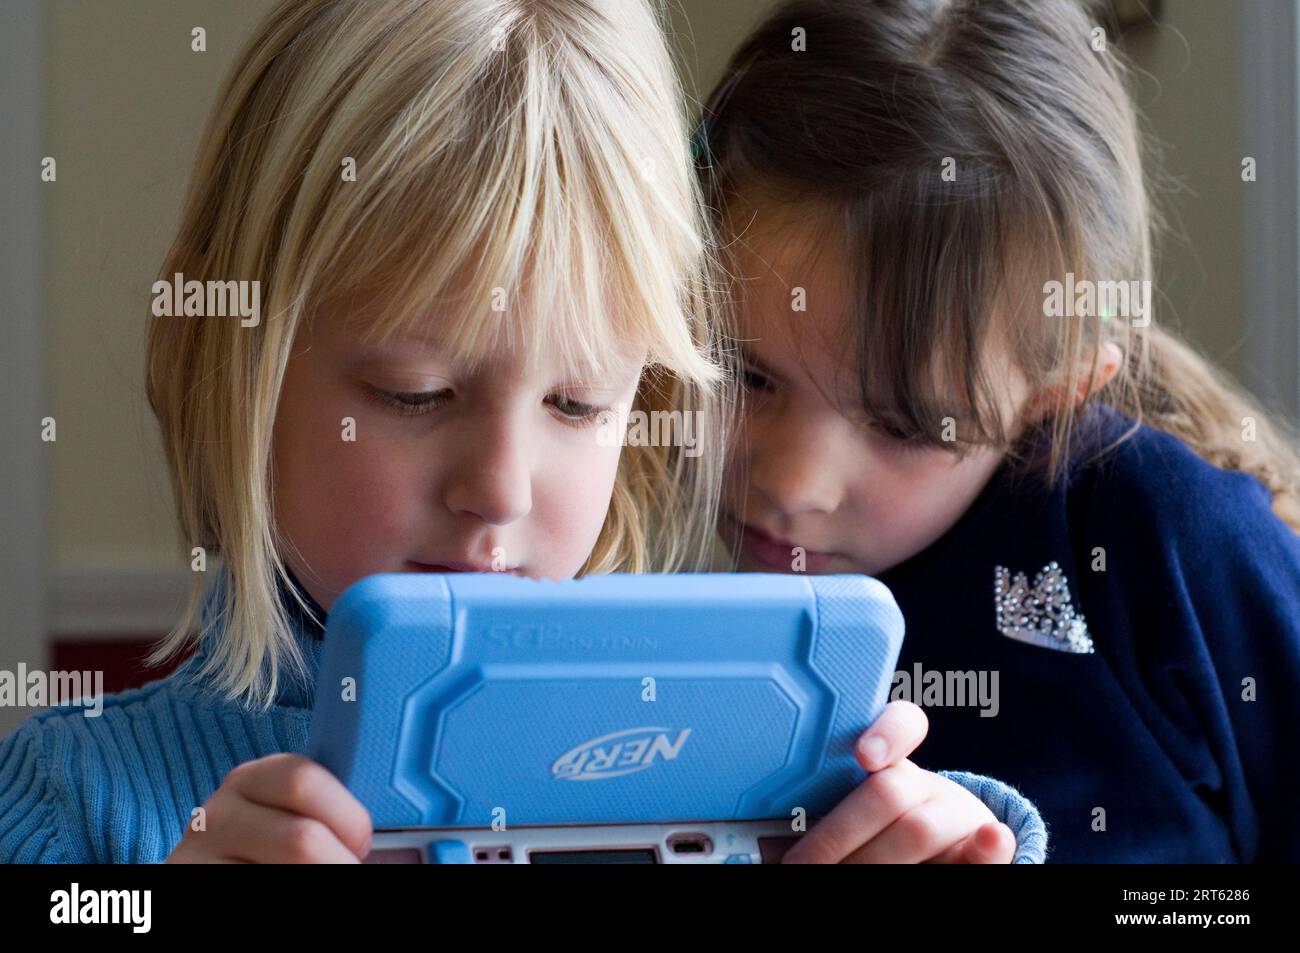 Two girls (5-6 years) playing a hand held video game. Stock Photo